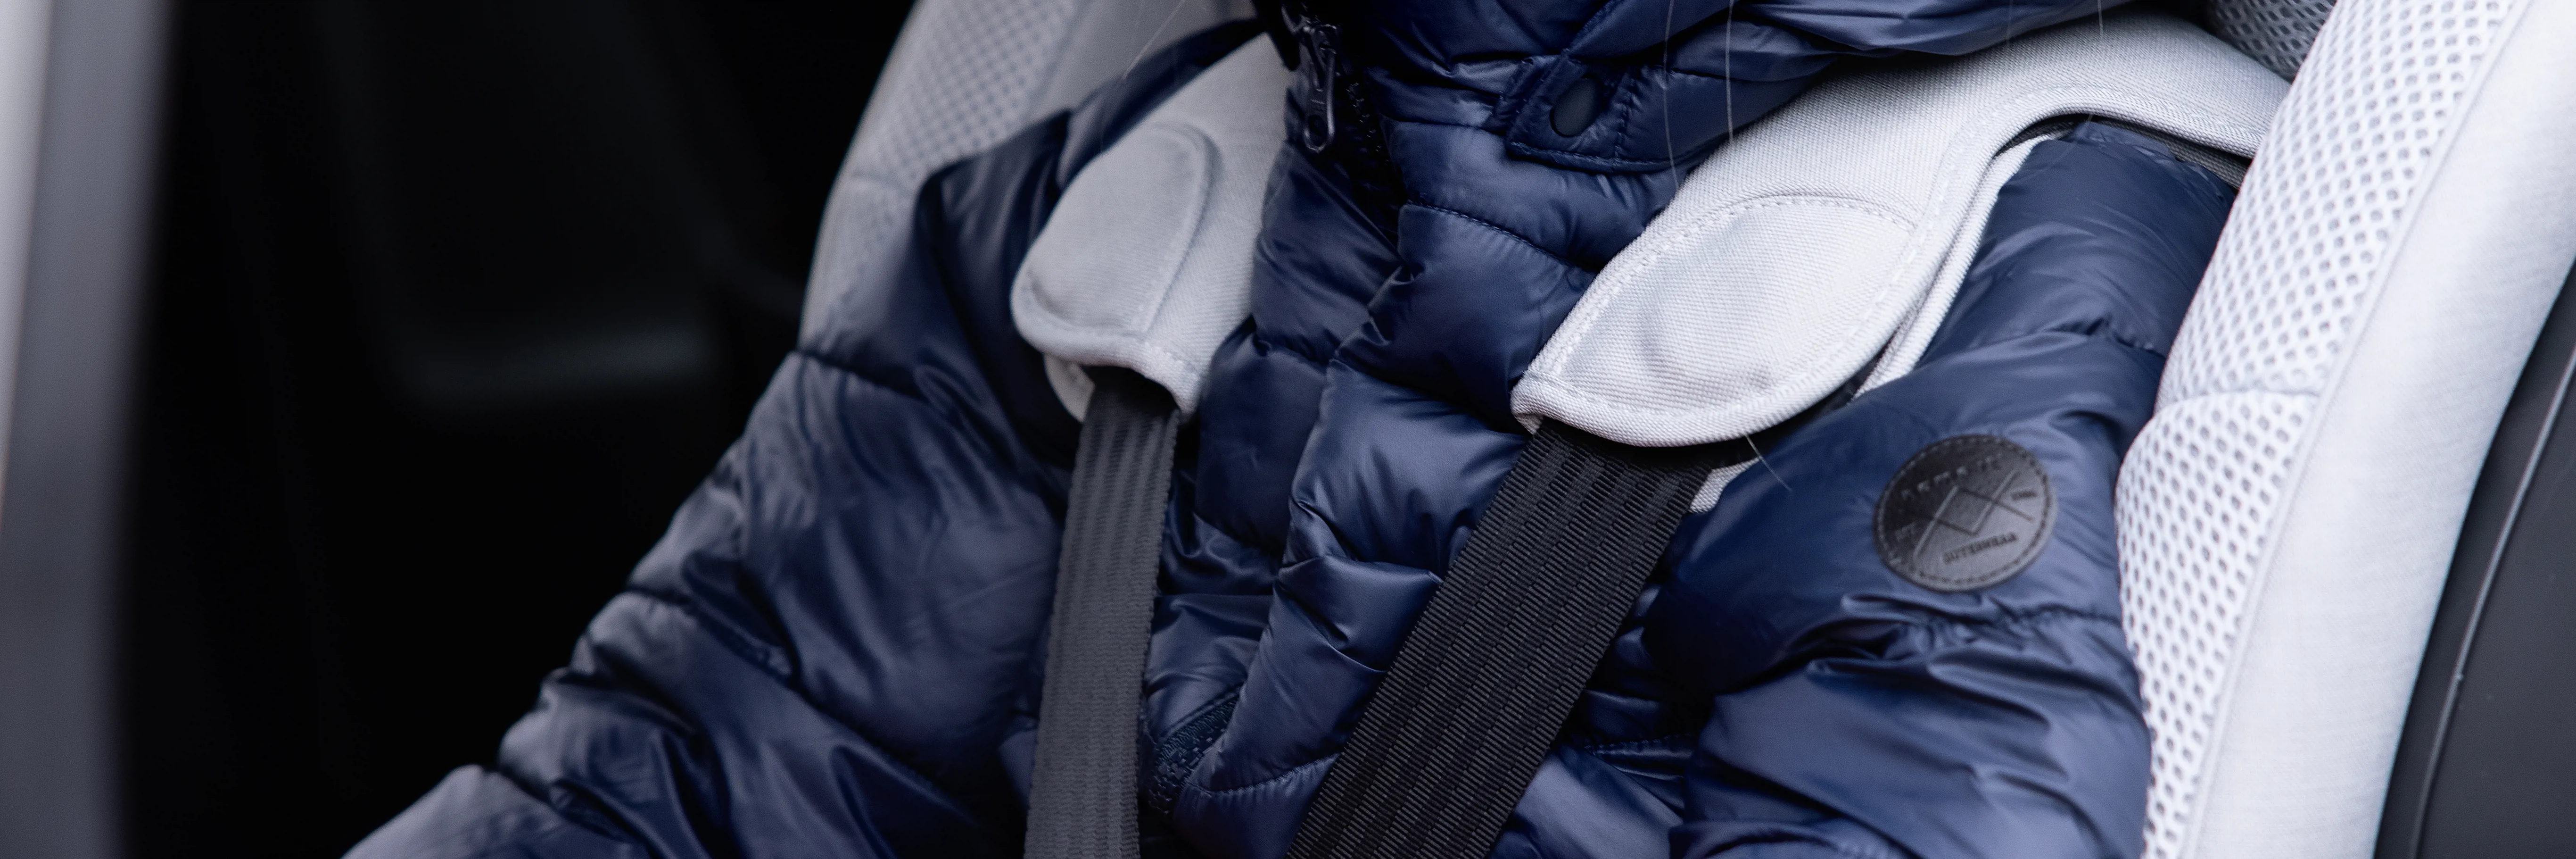 CarSeat Safety Page - ☃️‼️‼️All about Winter Jackets